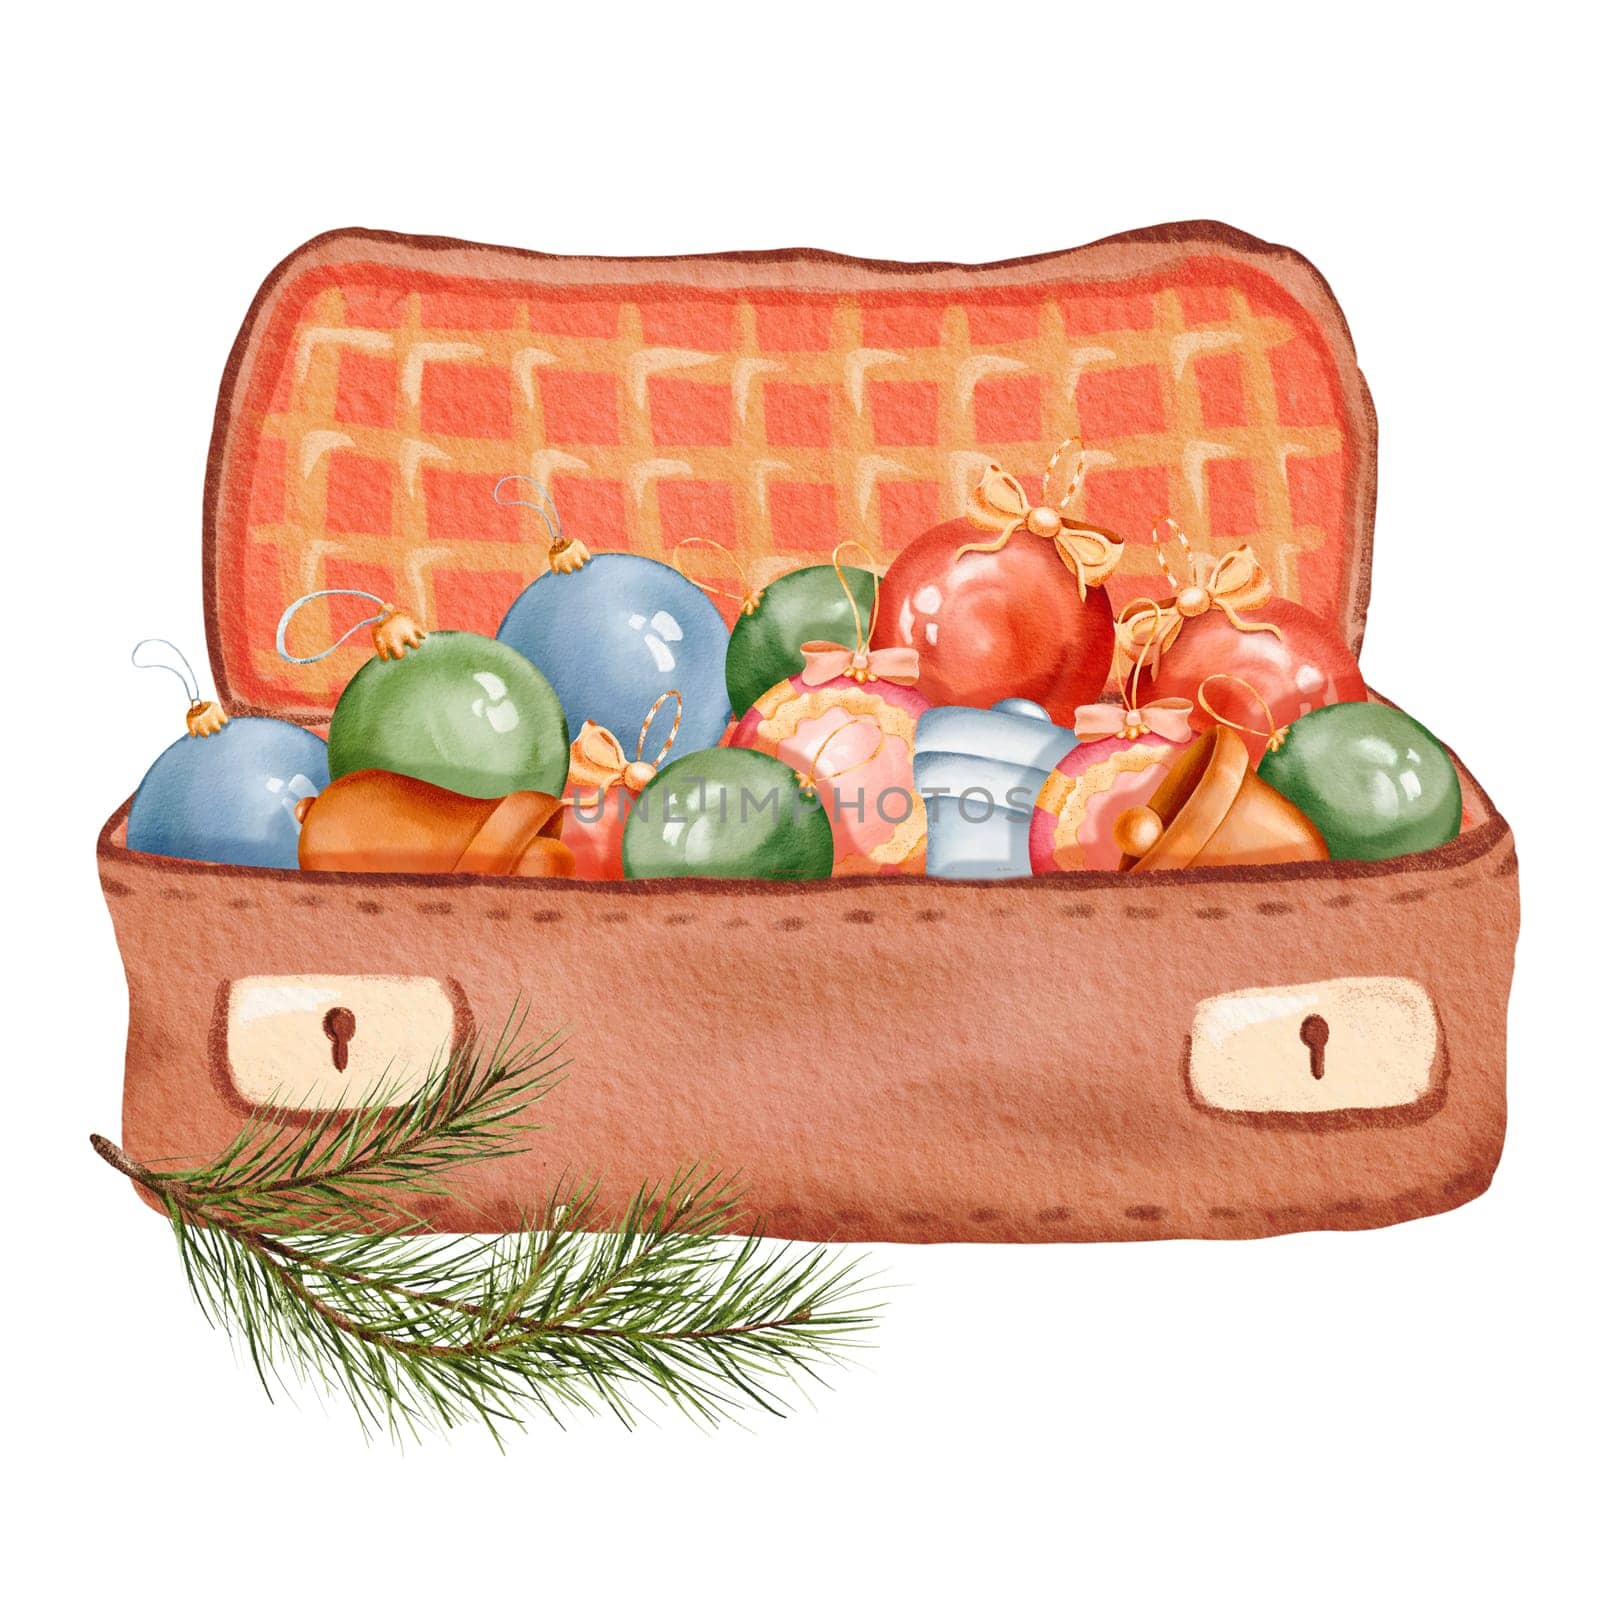 Christmas scene. cozy suitcase filled with holiday ornaments. Colorful baubles, delicate bells. A new year tree branch. For cards, invites, posters, stickers. Watercolor illustration by Art_Mari_Ka